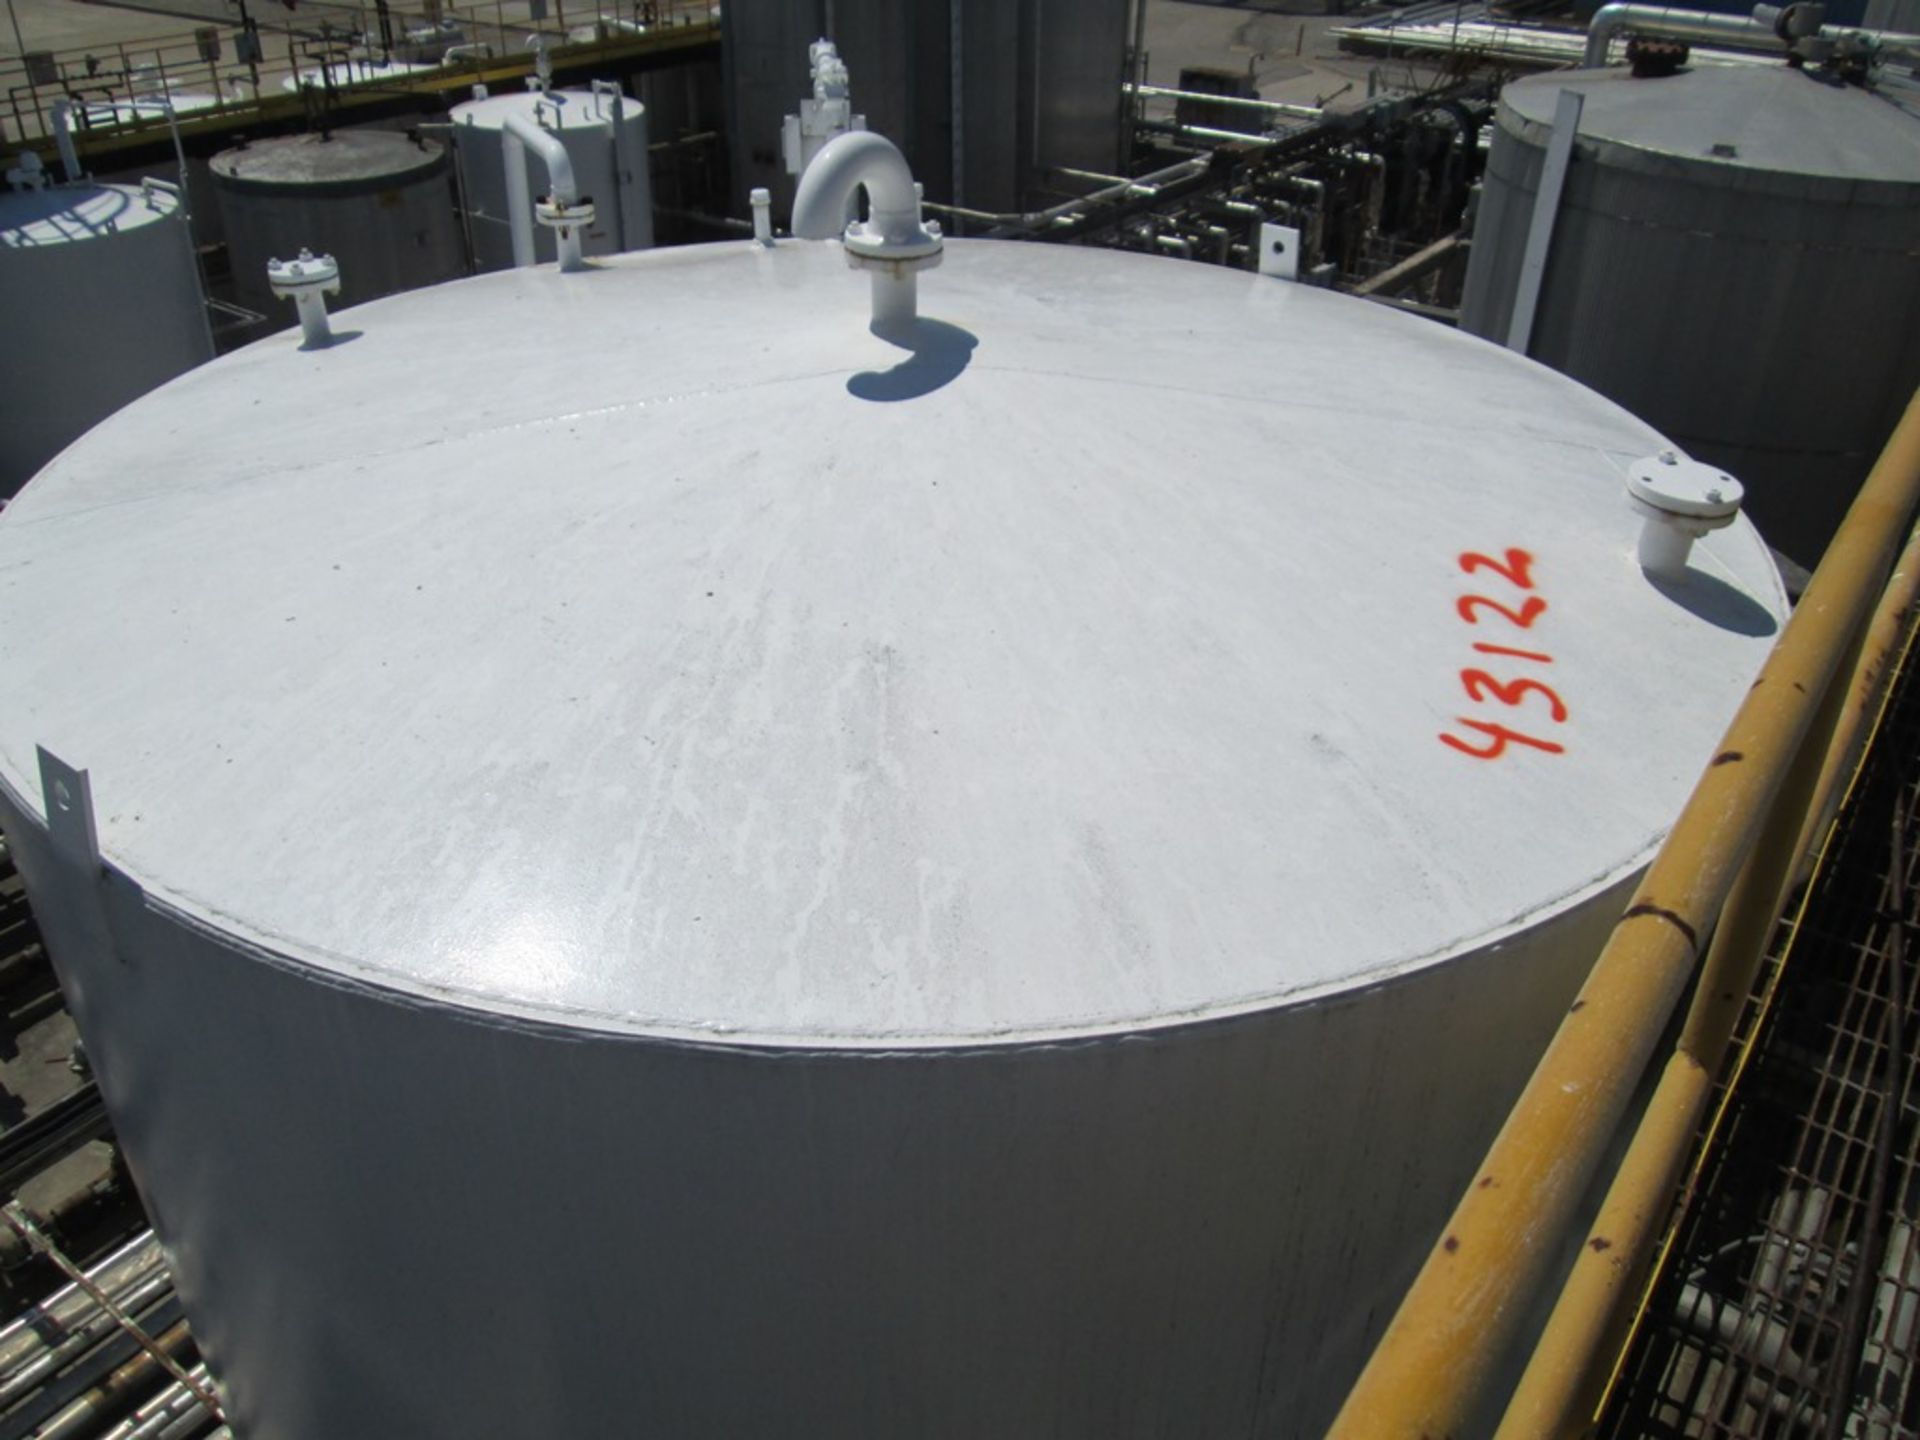 14500 gallon O'Conner storage tank, carbon steel construction, 10'6" diameter x 23' straight side, - Image 2 of 10